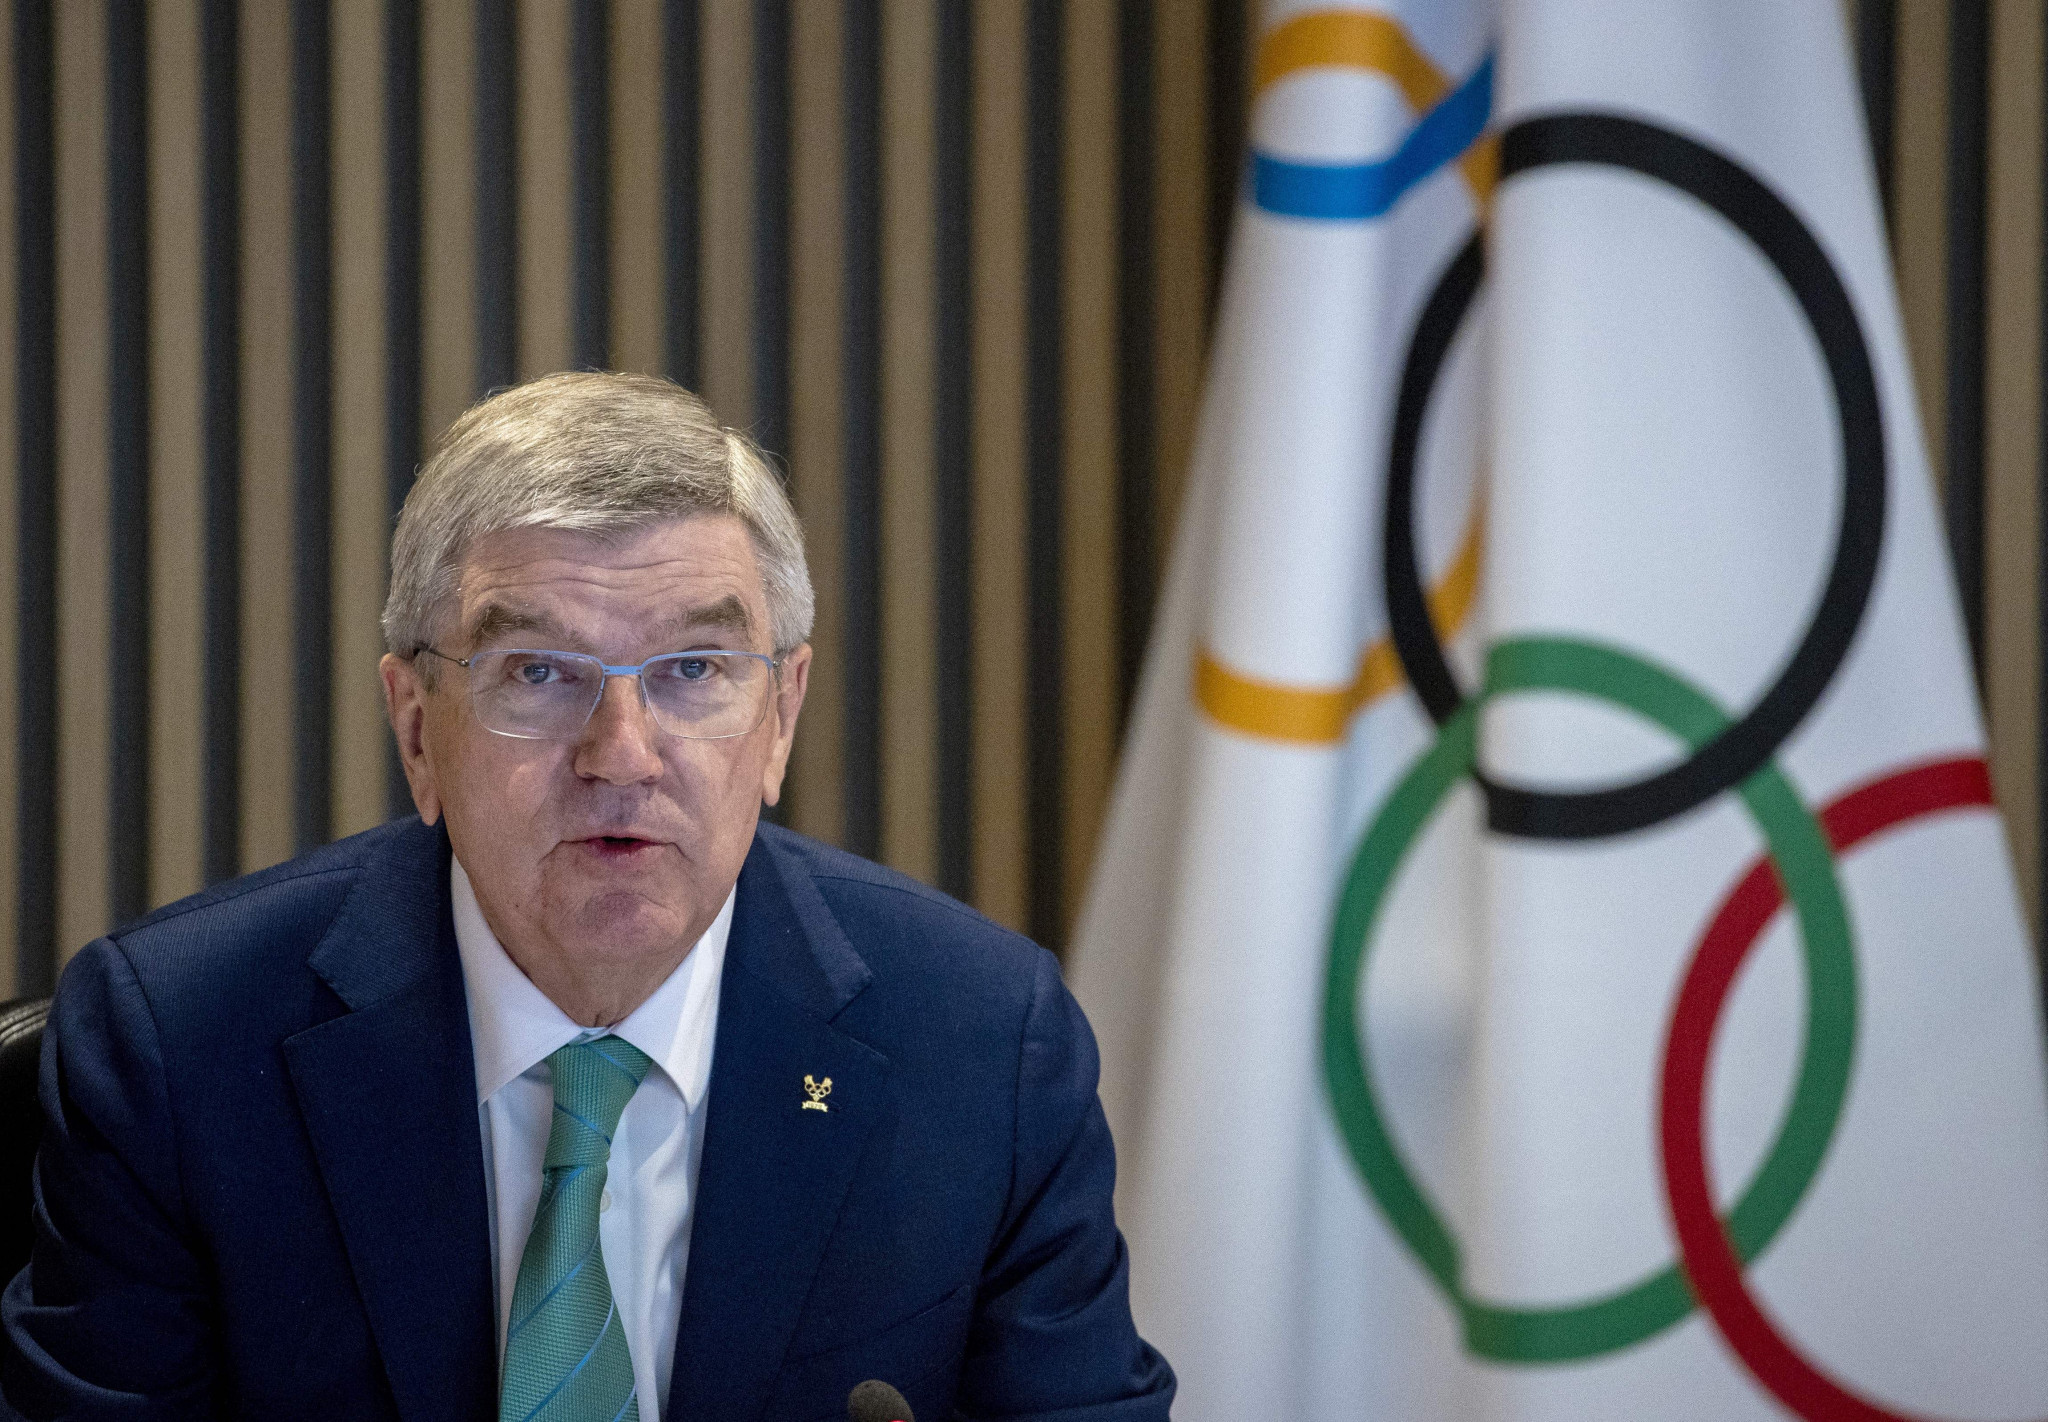 IOC President Thomas Bach has been contacting International Federations urging them not to lift a ban on Russia and Belarus imposed following the full-scale invasion of Ukraine in February ©Getty Images